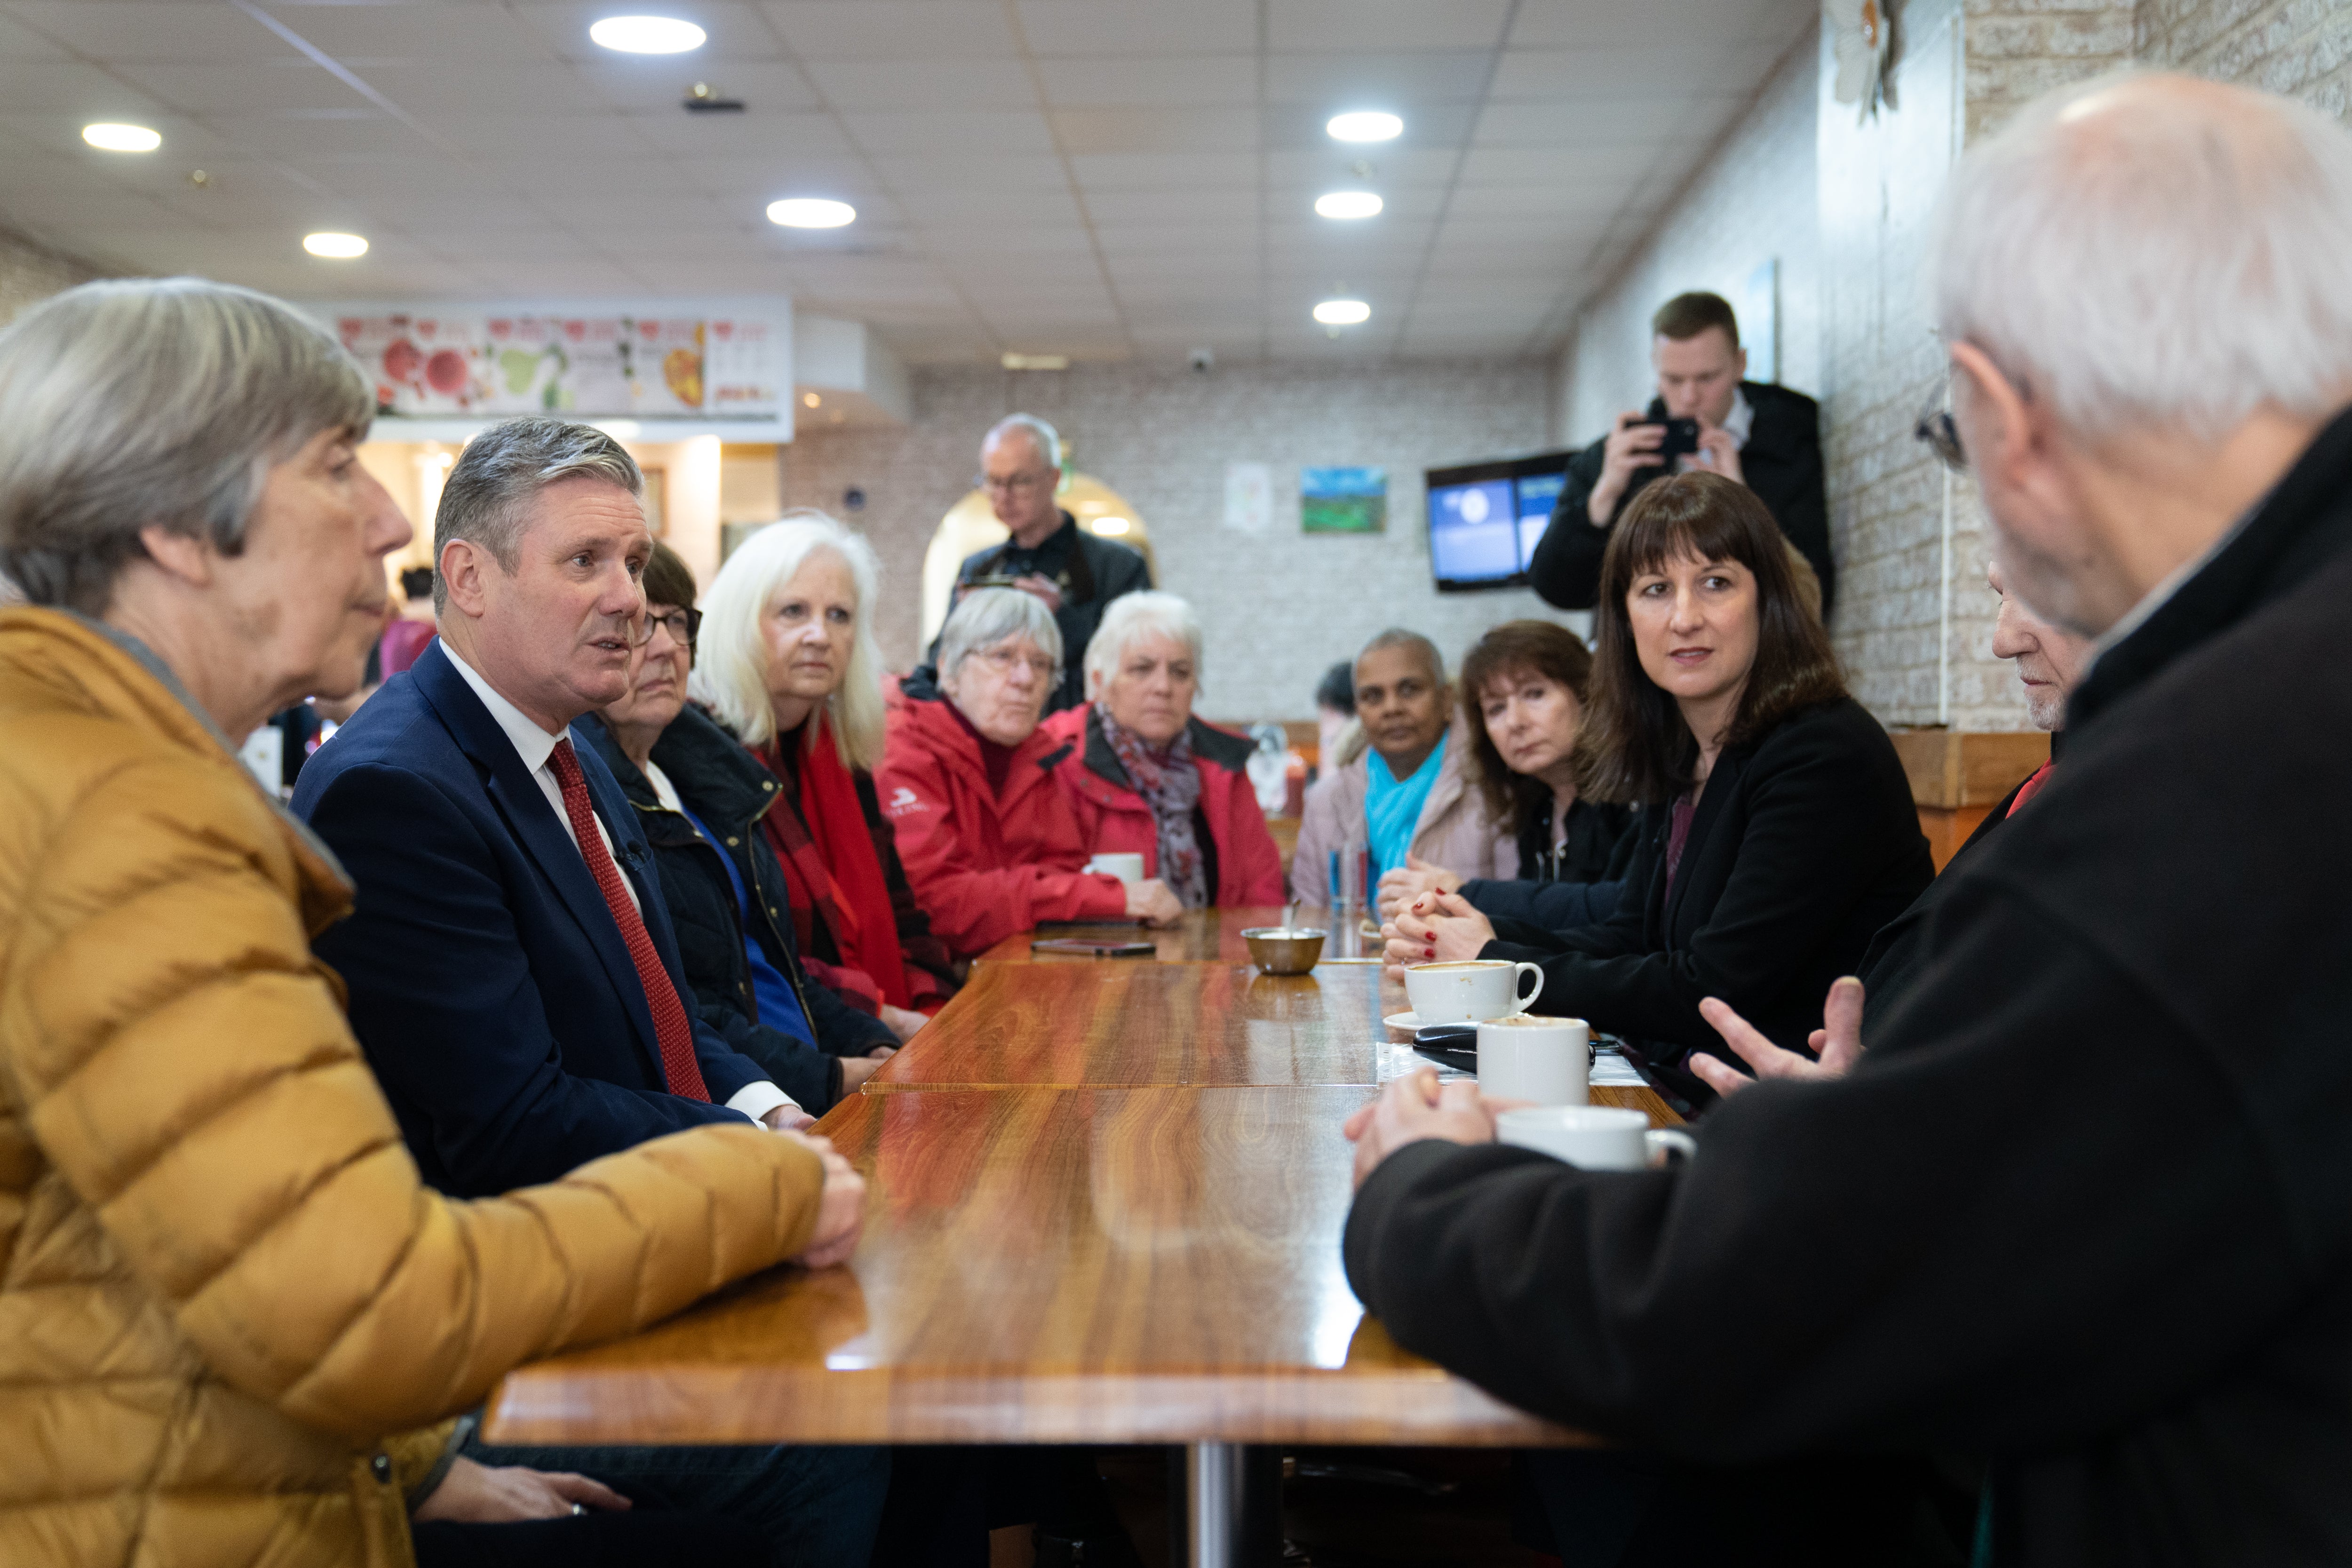 Labour Party leader Sir Keir Starmer and shadow chancellor Rachel Reeves meeting pensioners in Stevenage to talk about the rising cost of living and the impact it is having on those with fixed incomes (Joe Giddens/PA)